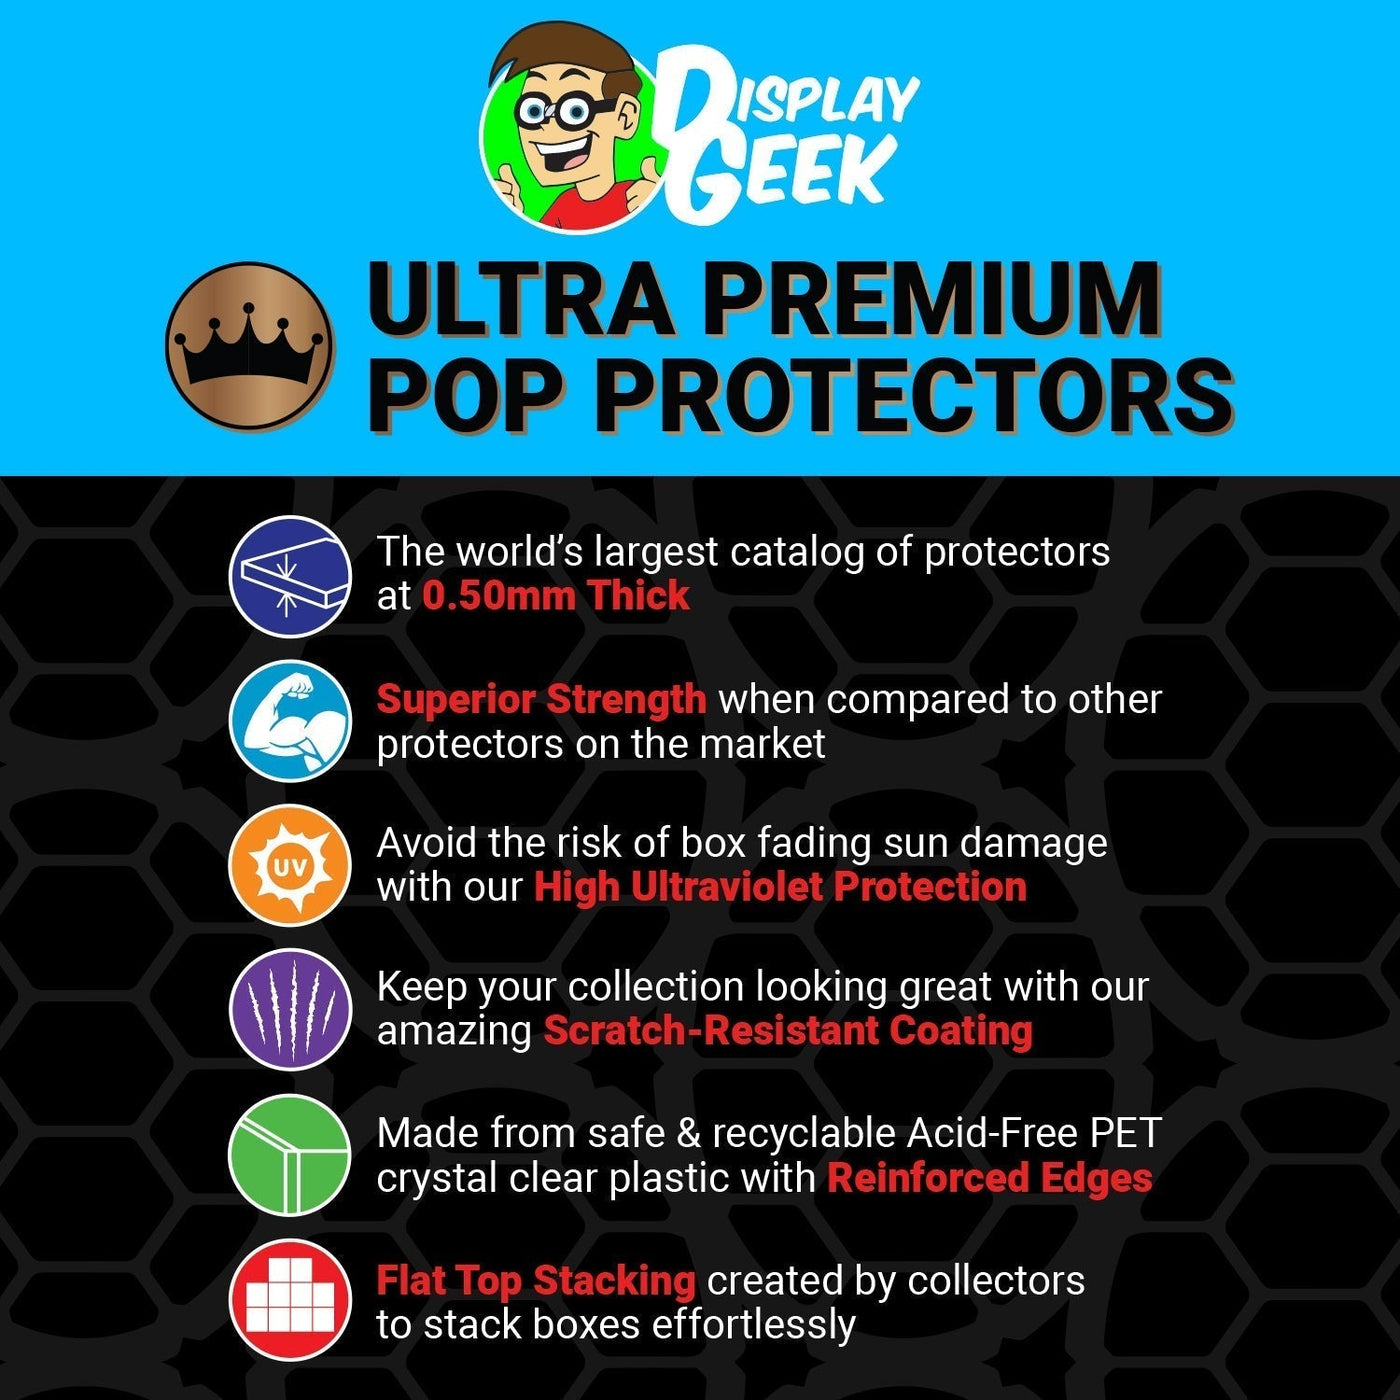 Pop Protector for Tracy McGrady #08 Funko Pop Magazine Covers on The Protector Guide App by Display Geek